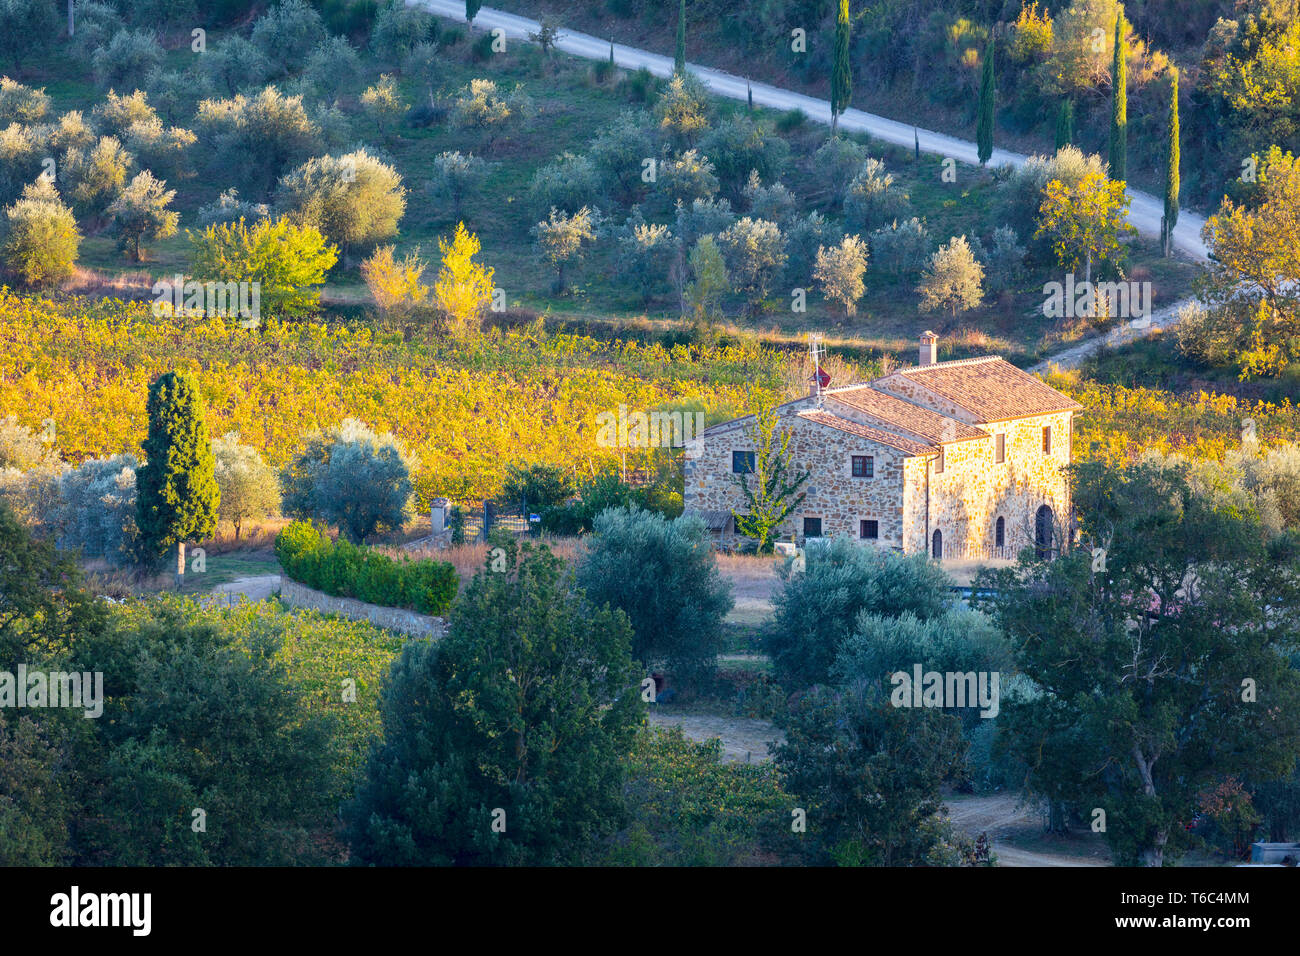 Italy, Tuscany, Province of Siena,  Montalcino, Stone farmhouse surrounded by vines in the autumn Stock Photo